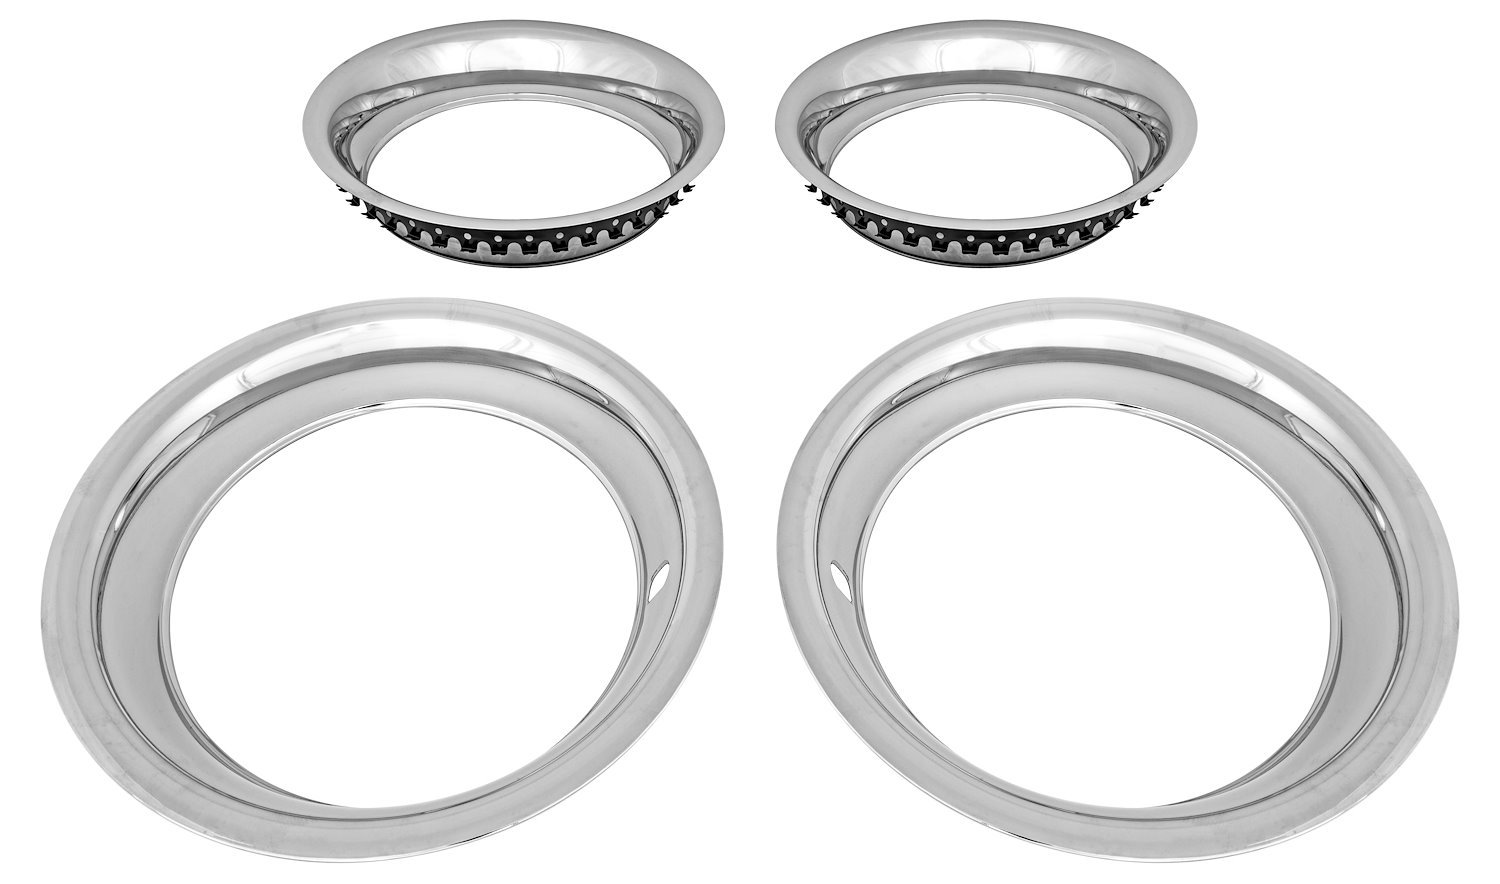 Stainless Steel Deep Dish Trim Ring Set for 15 in. x 7 in. Wheels [2.500 in. D x 2.750 in. W]